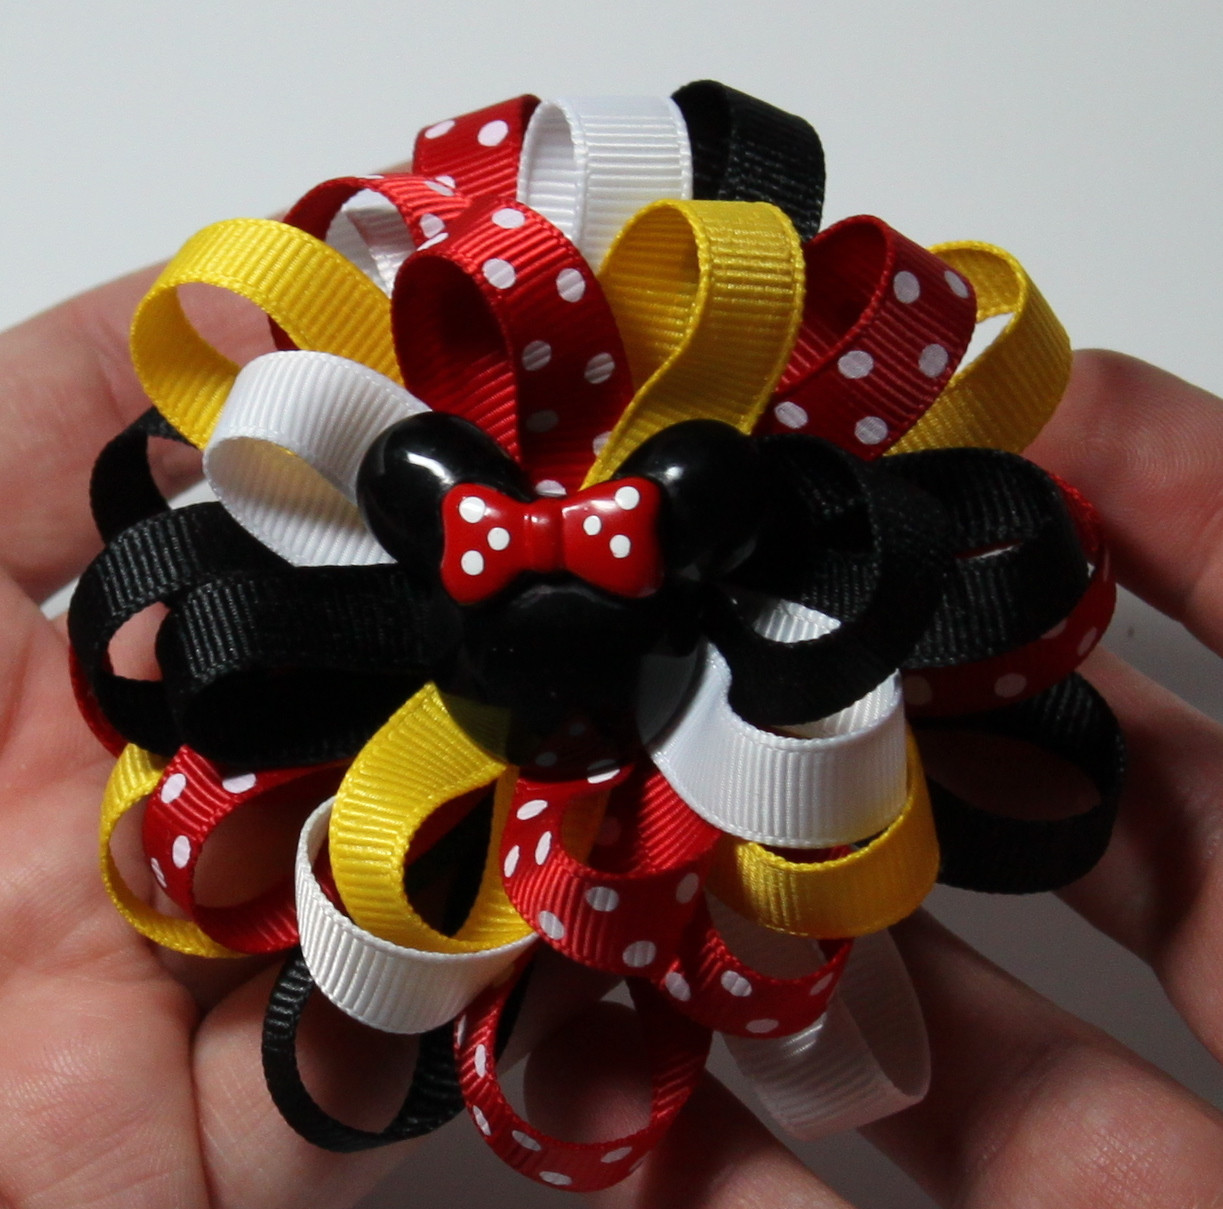 DIY Hair Bows Tutorial
 Ribbons and Much More Loopy Flower Hair Bow Tutorial